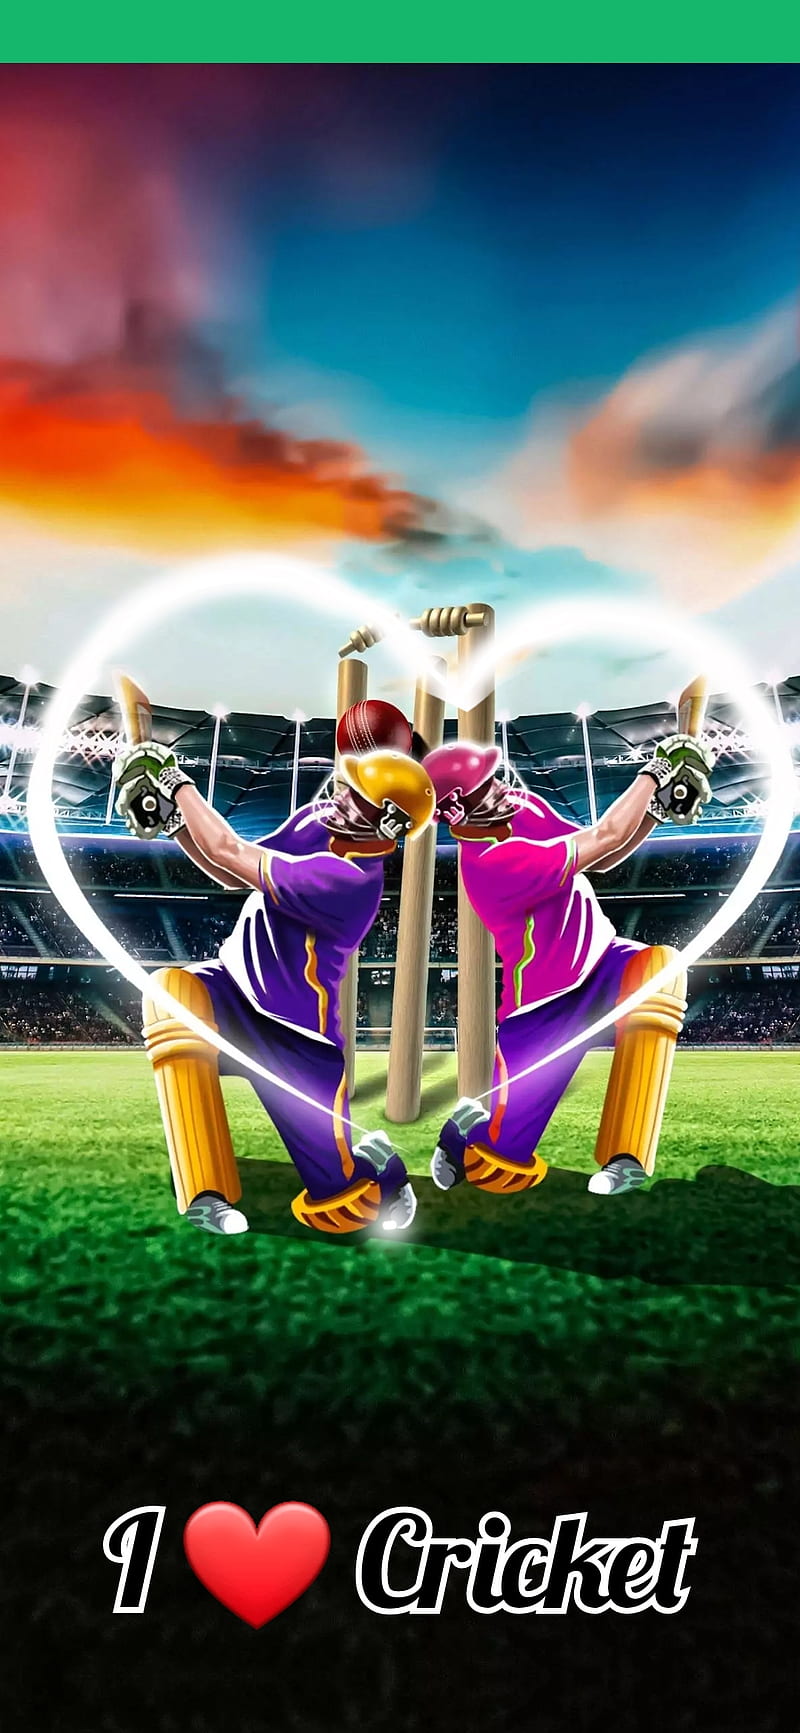 Cricket Match Background Images, HD Pictures and Wallpaper For Free  Download | Pngtree